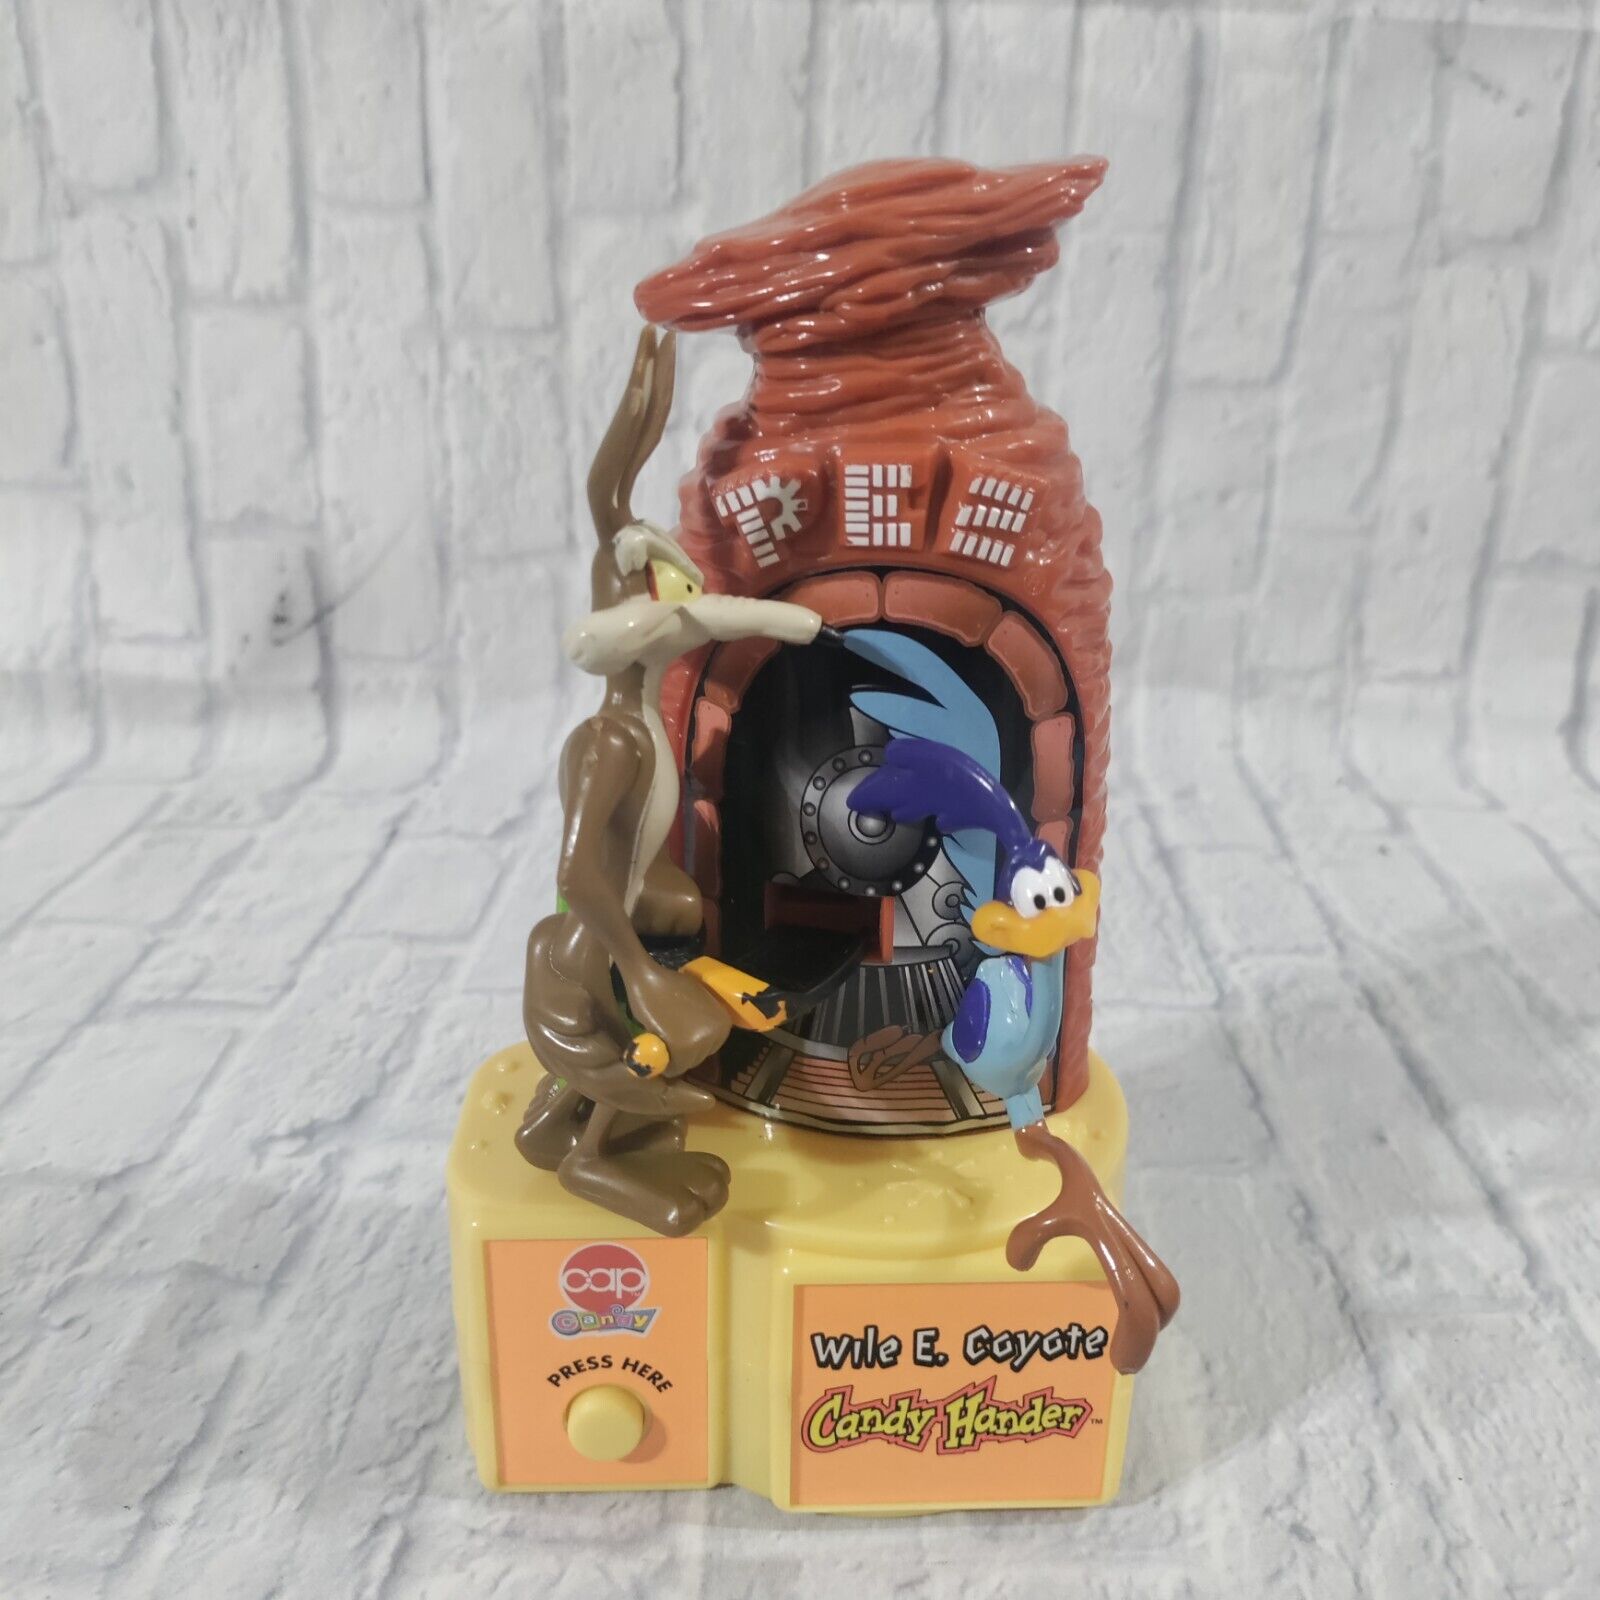 Pez Wile E. Coyote Candy Hander dispenser- 1998 Looney Tunes